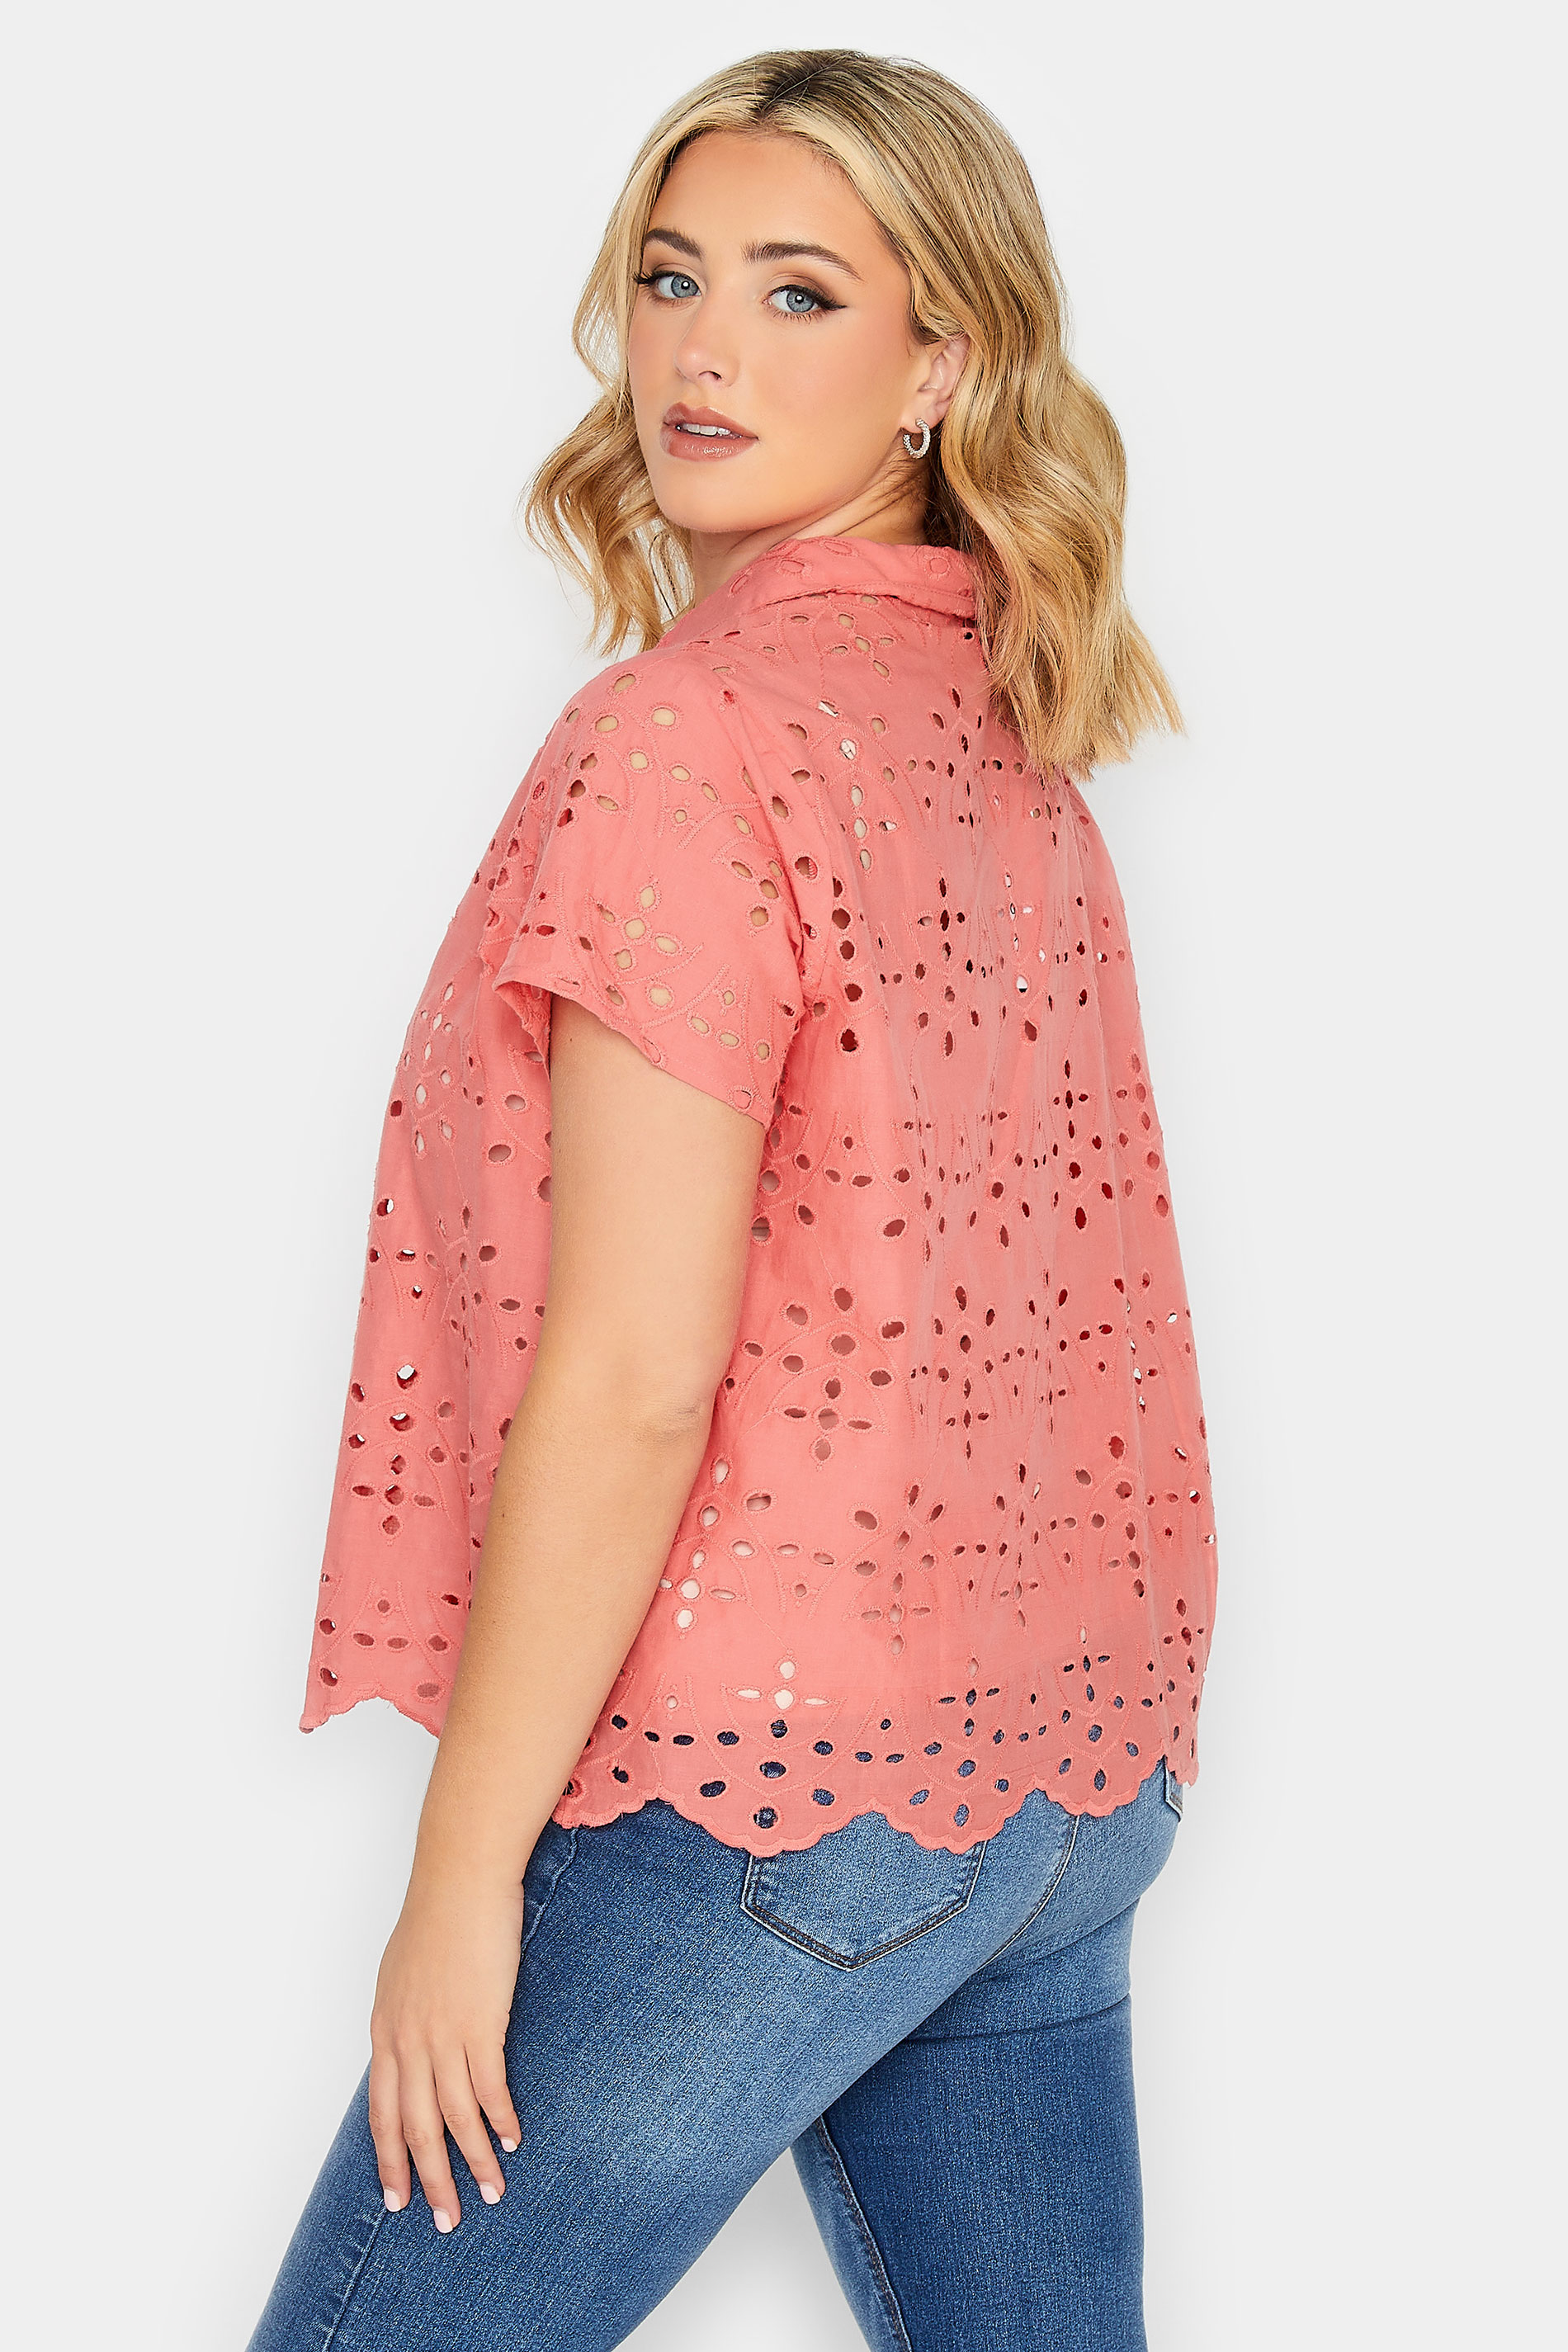 YOURS PETITE Plus Size Coral Pink Broderie Anglaise Short Sleeve Shirt | Yours Clothing 3